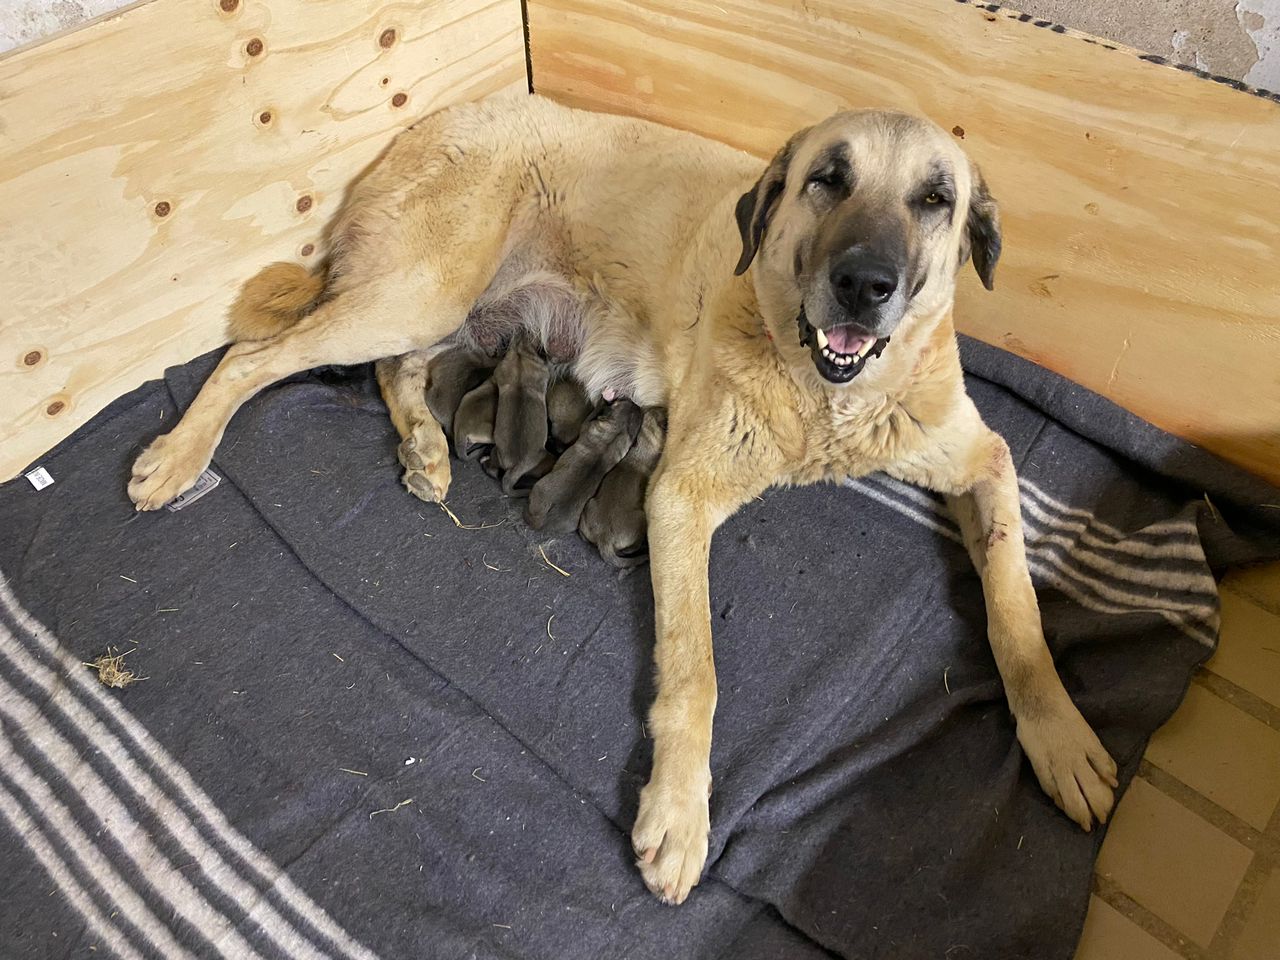 Livestock Guarding Dogs has welcomed a beautiful litter into the world